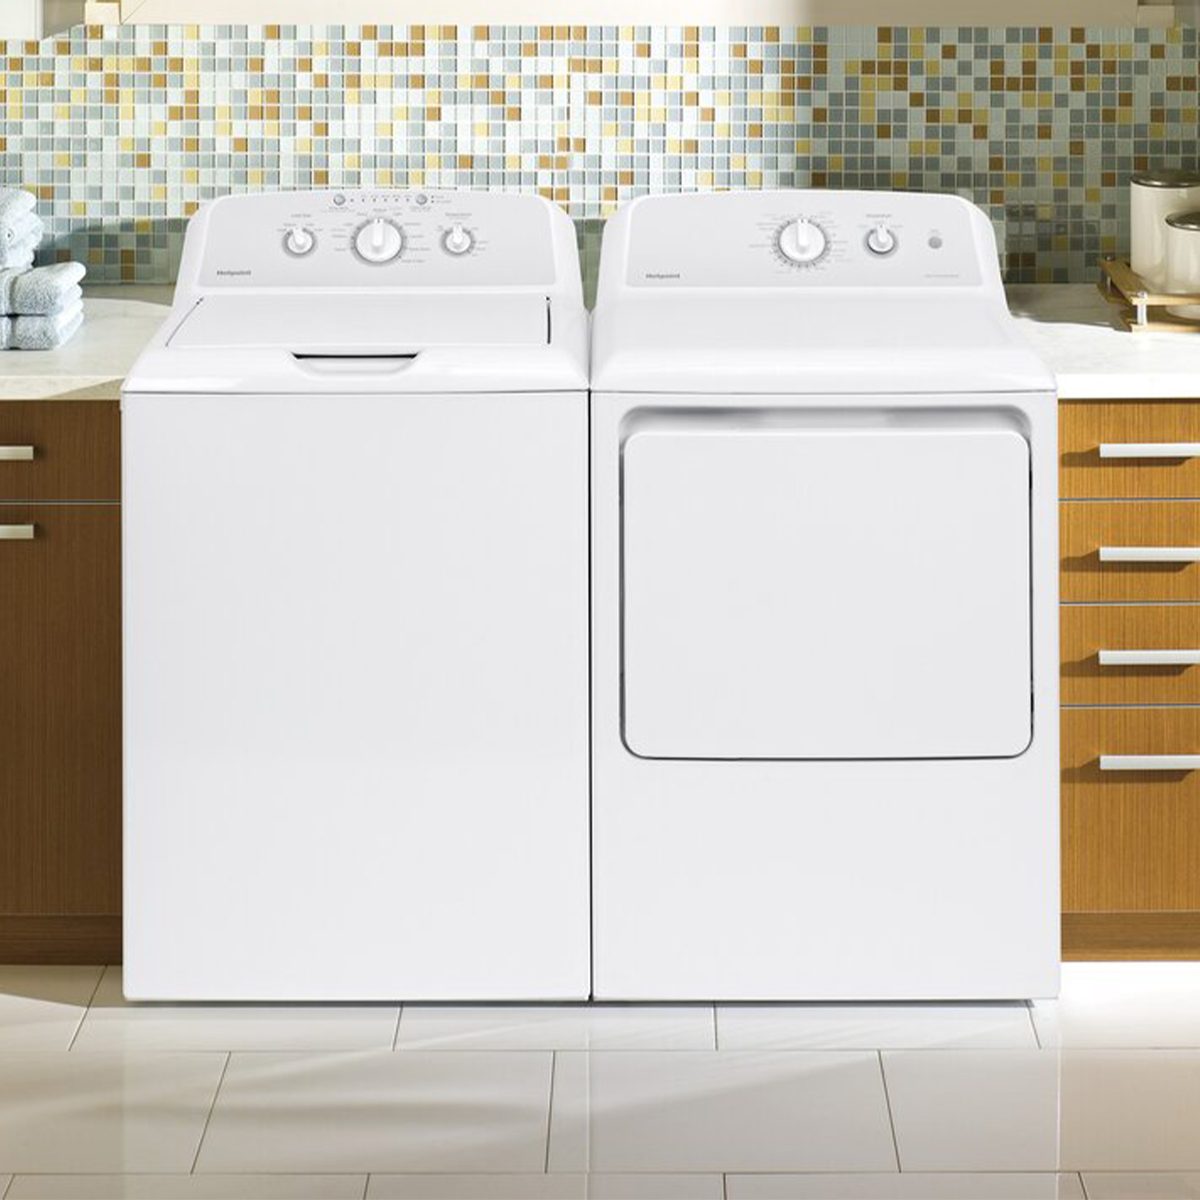 7 Most Reliable Washing Machine Brands for Every Home Type